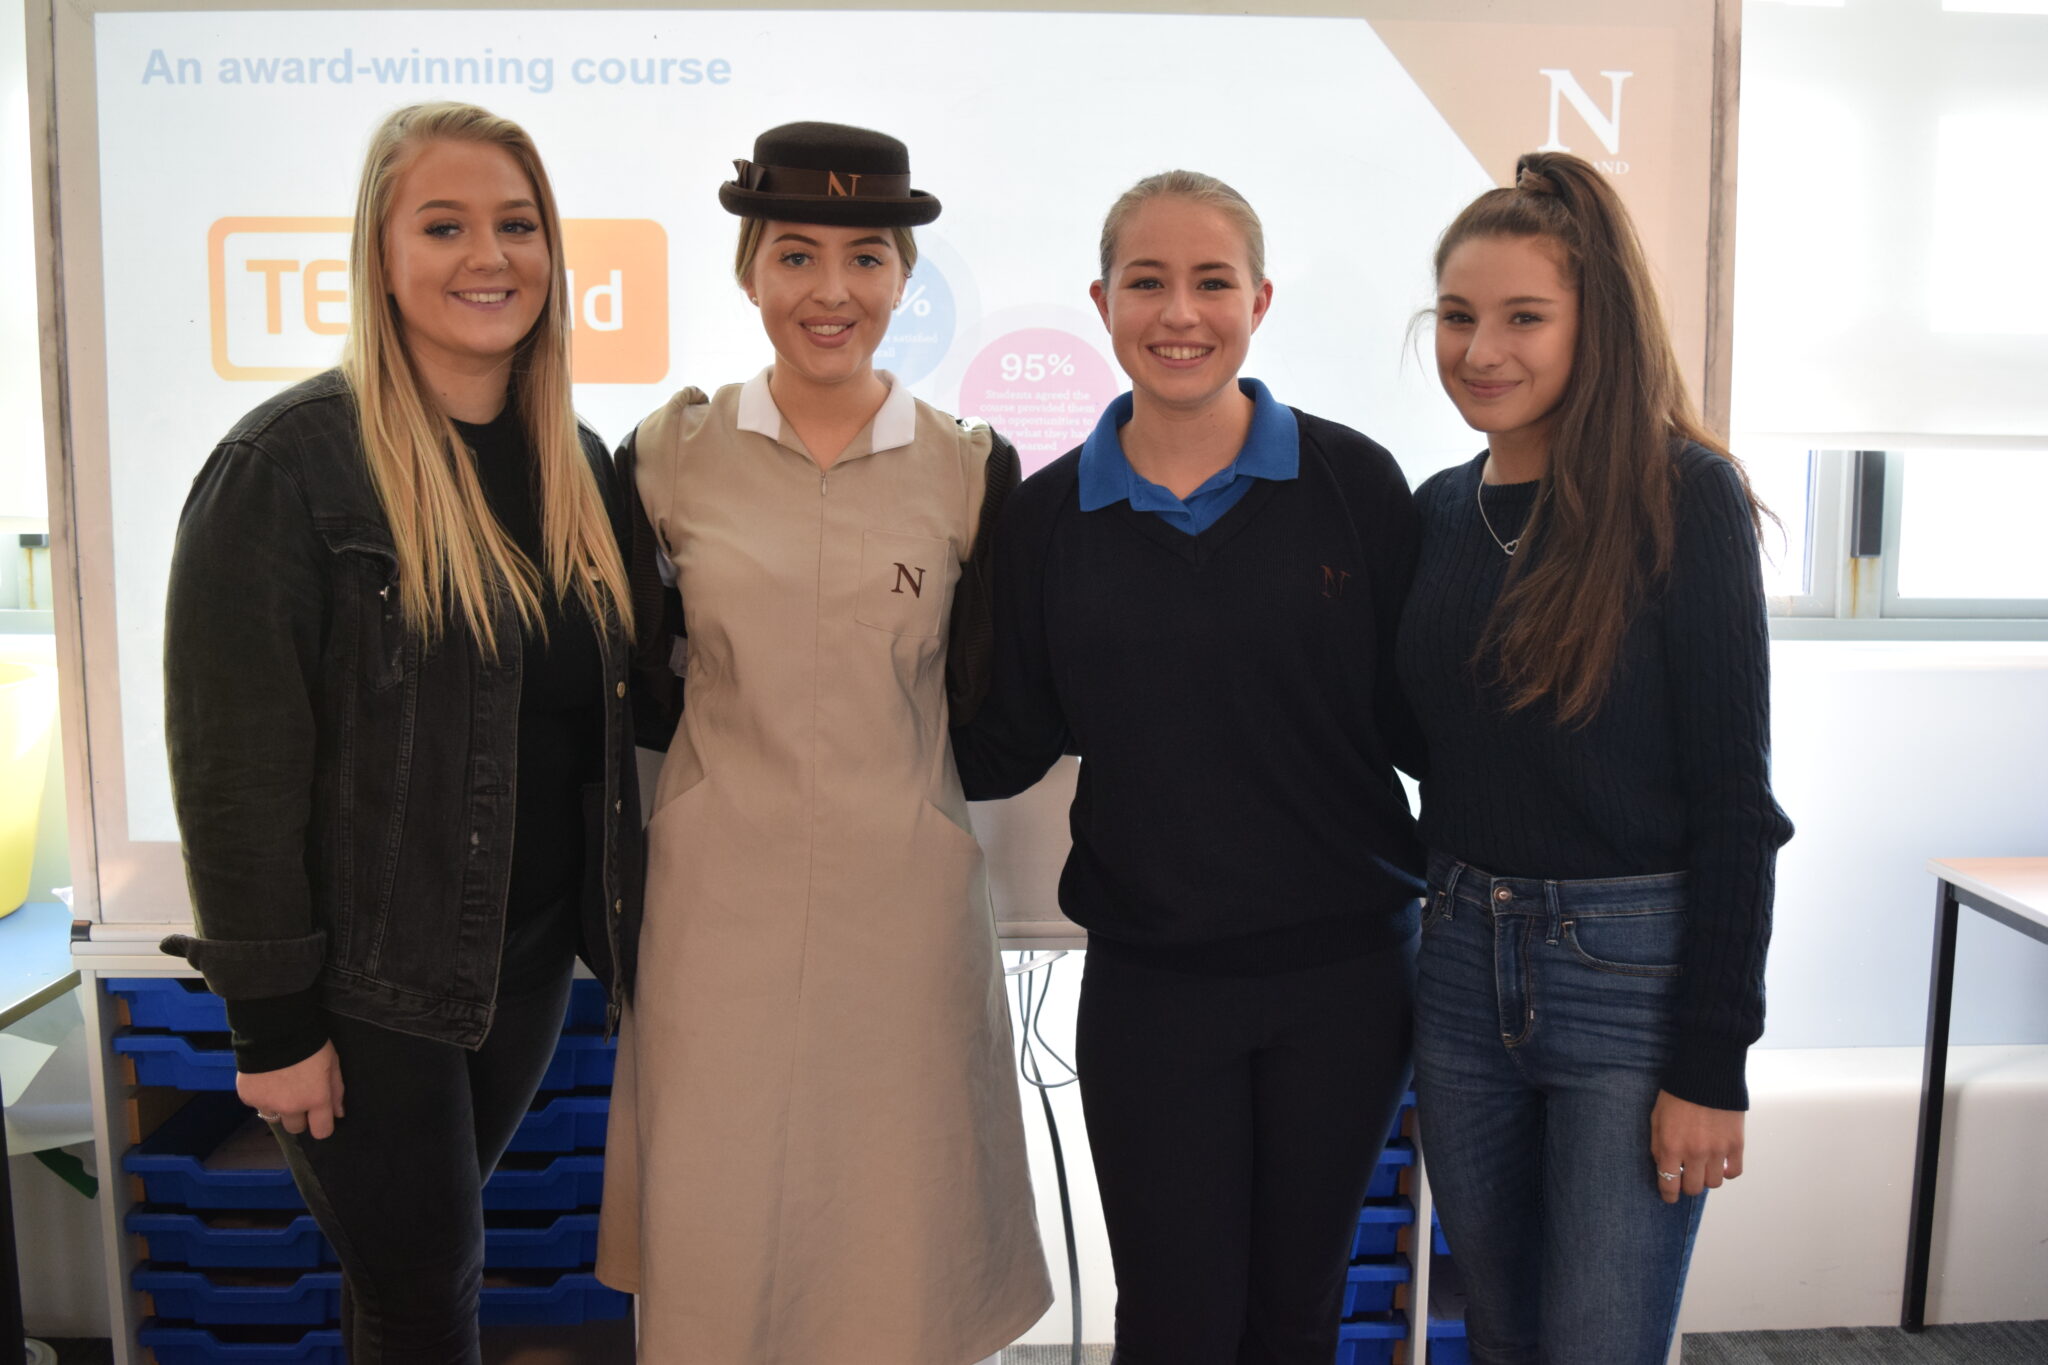 Norland Nannies visit college